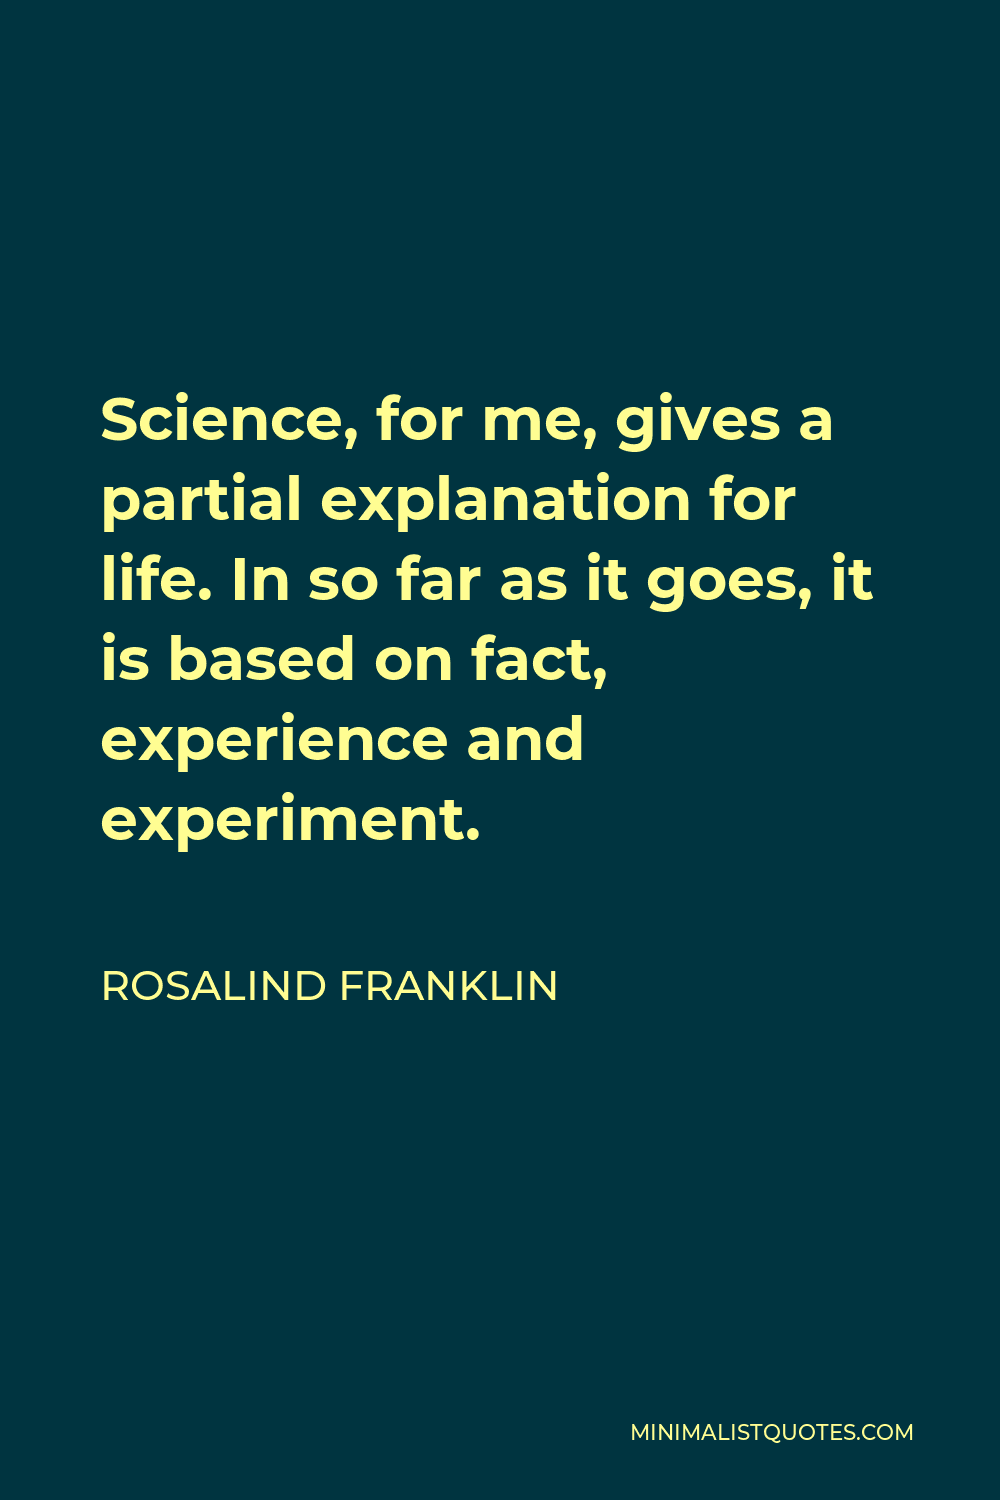 Rosalind Franklin Quote - Science, for me, gives a partial explanation for life. In so far as it goes, it is based on fact, experience and experiment.